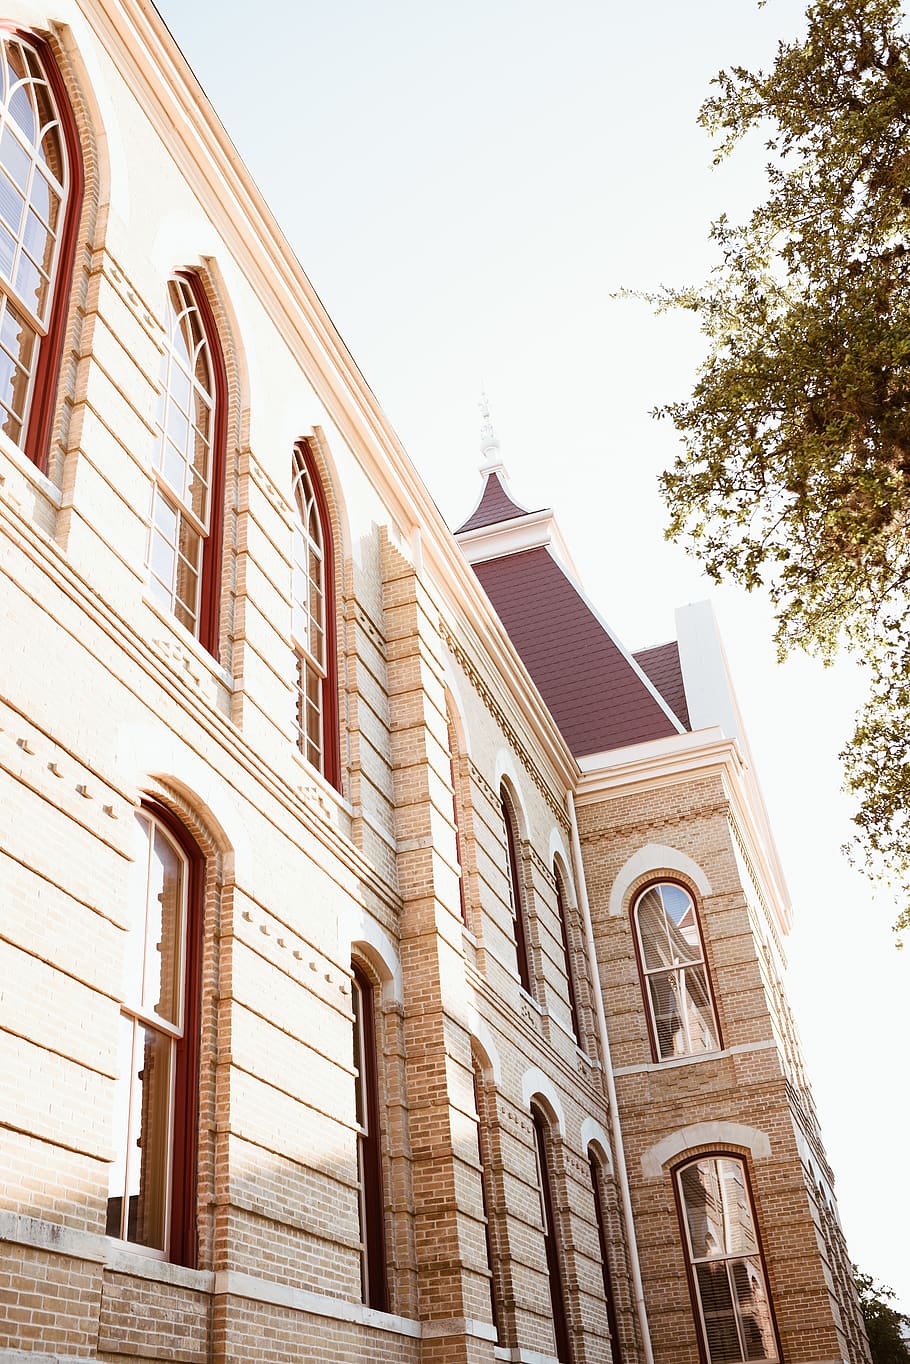 HD wallpaper: united states, san marcos, school, texas state, campus, architecture